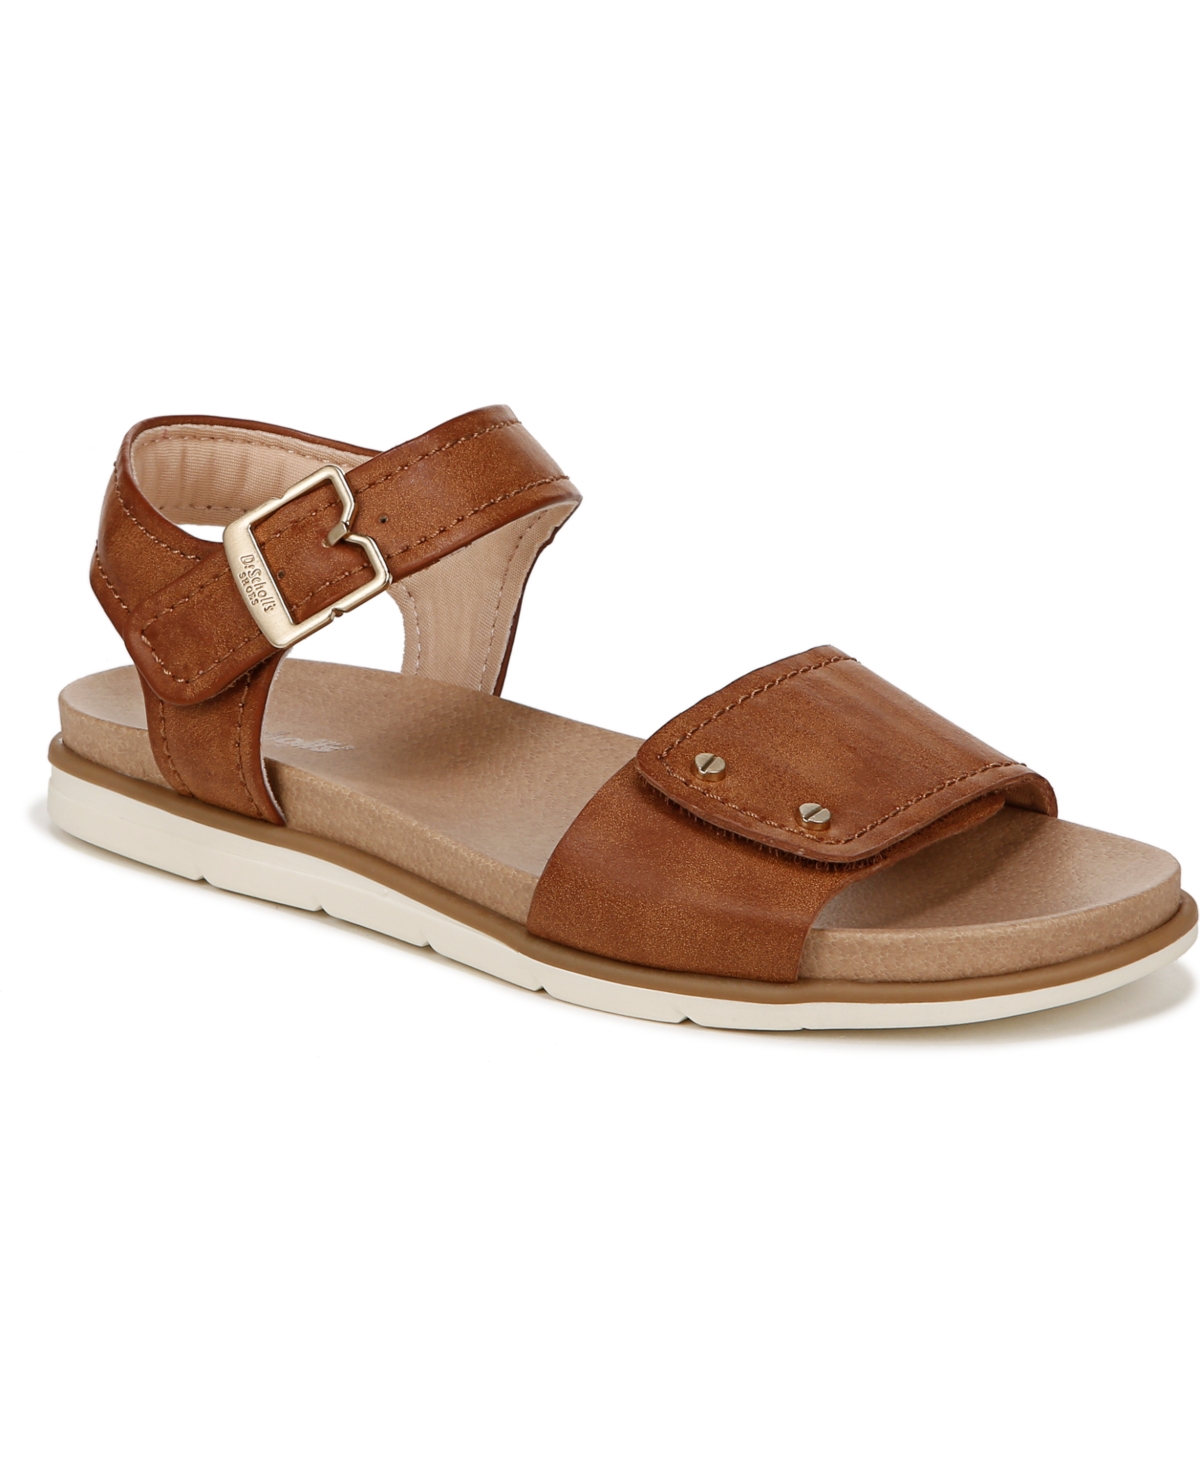 Dr. Scholl's Women's Nicely Sun Ankle Strap Sandals In Brown Faux Leather